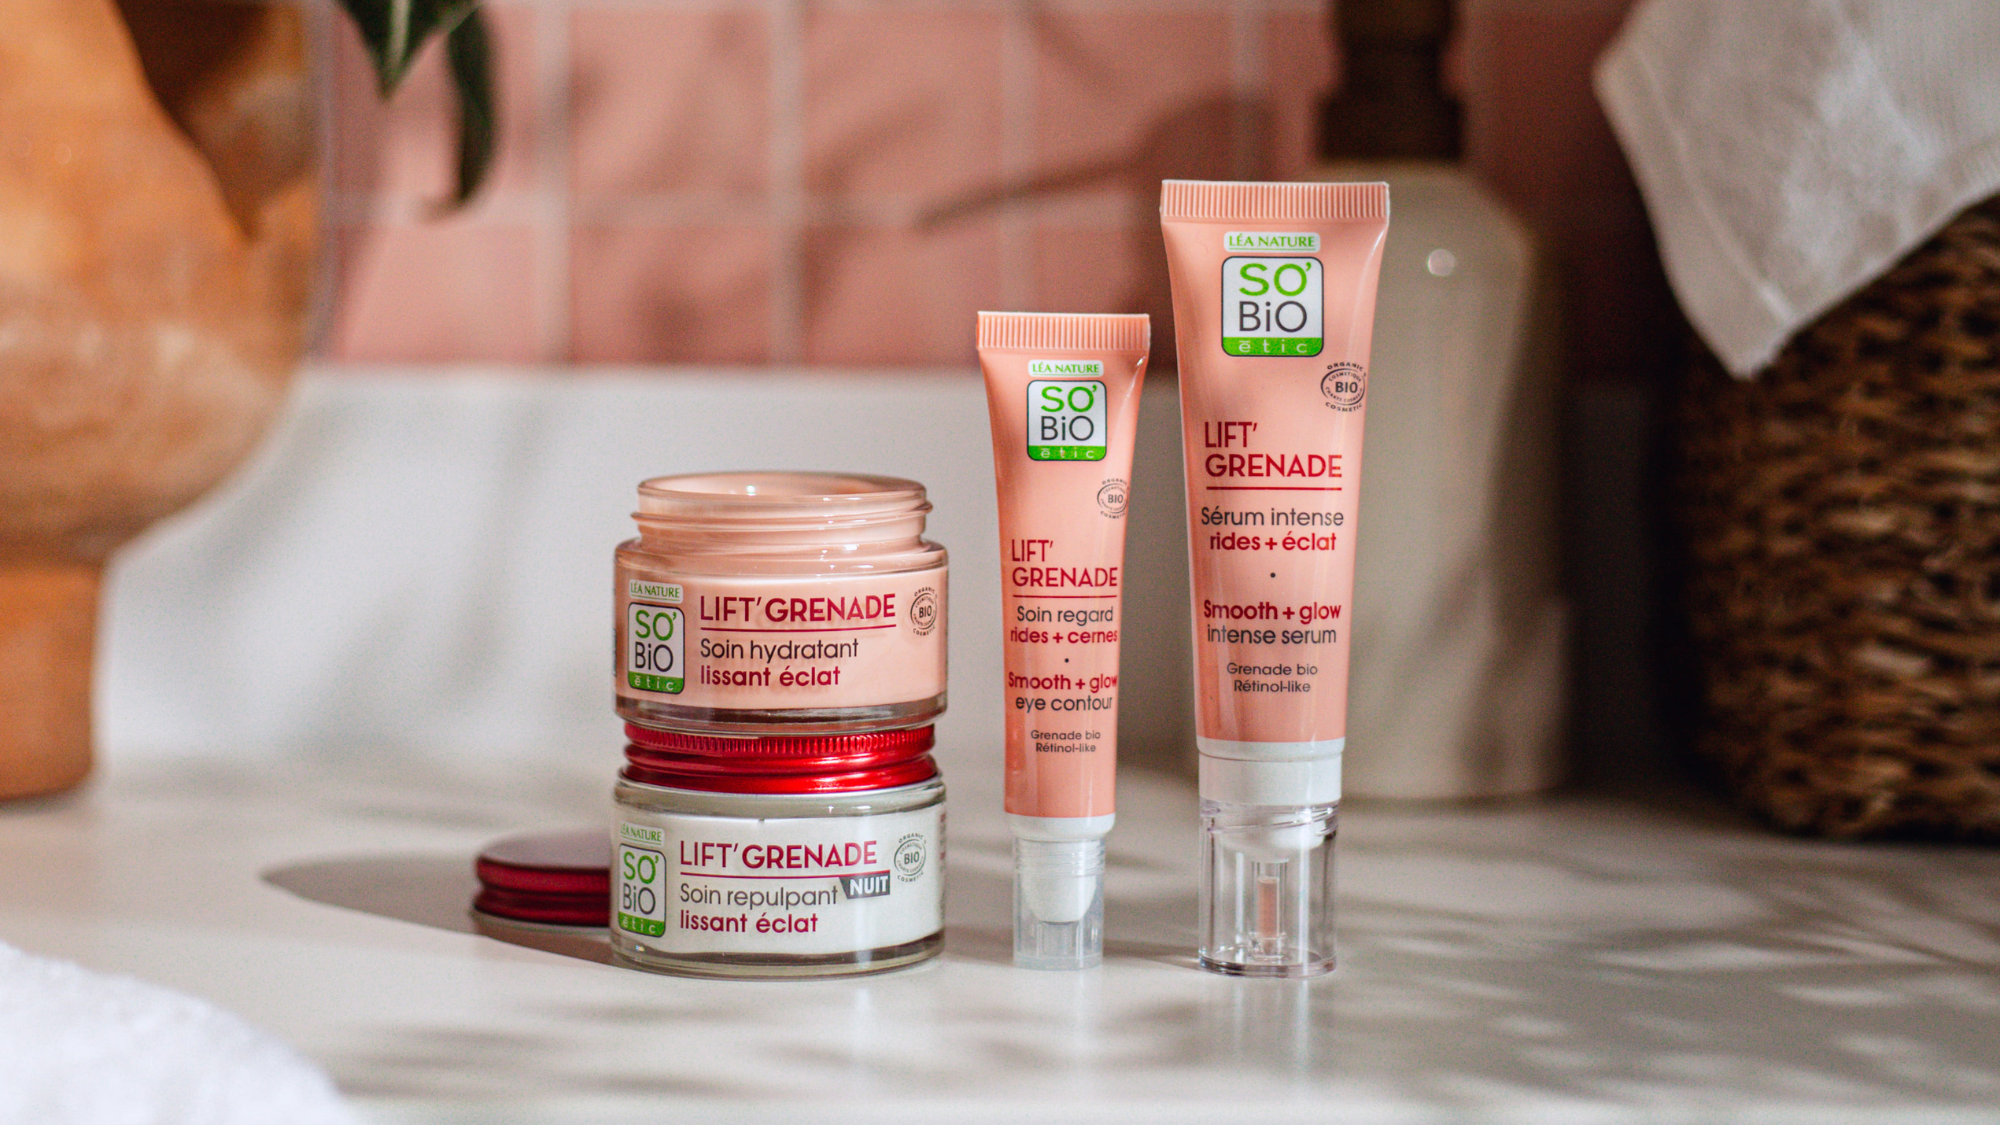 SO’BiO étic Lift’Grenade skincare collection featuring organic pomegranate for radiant, anti-aging benefits.